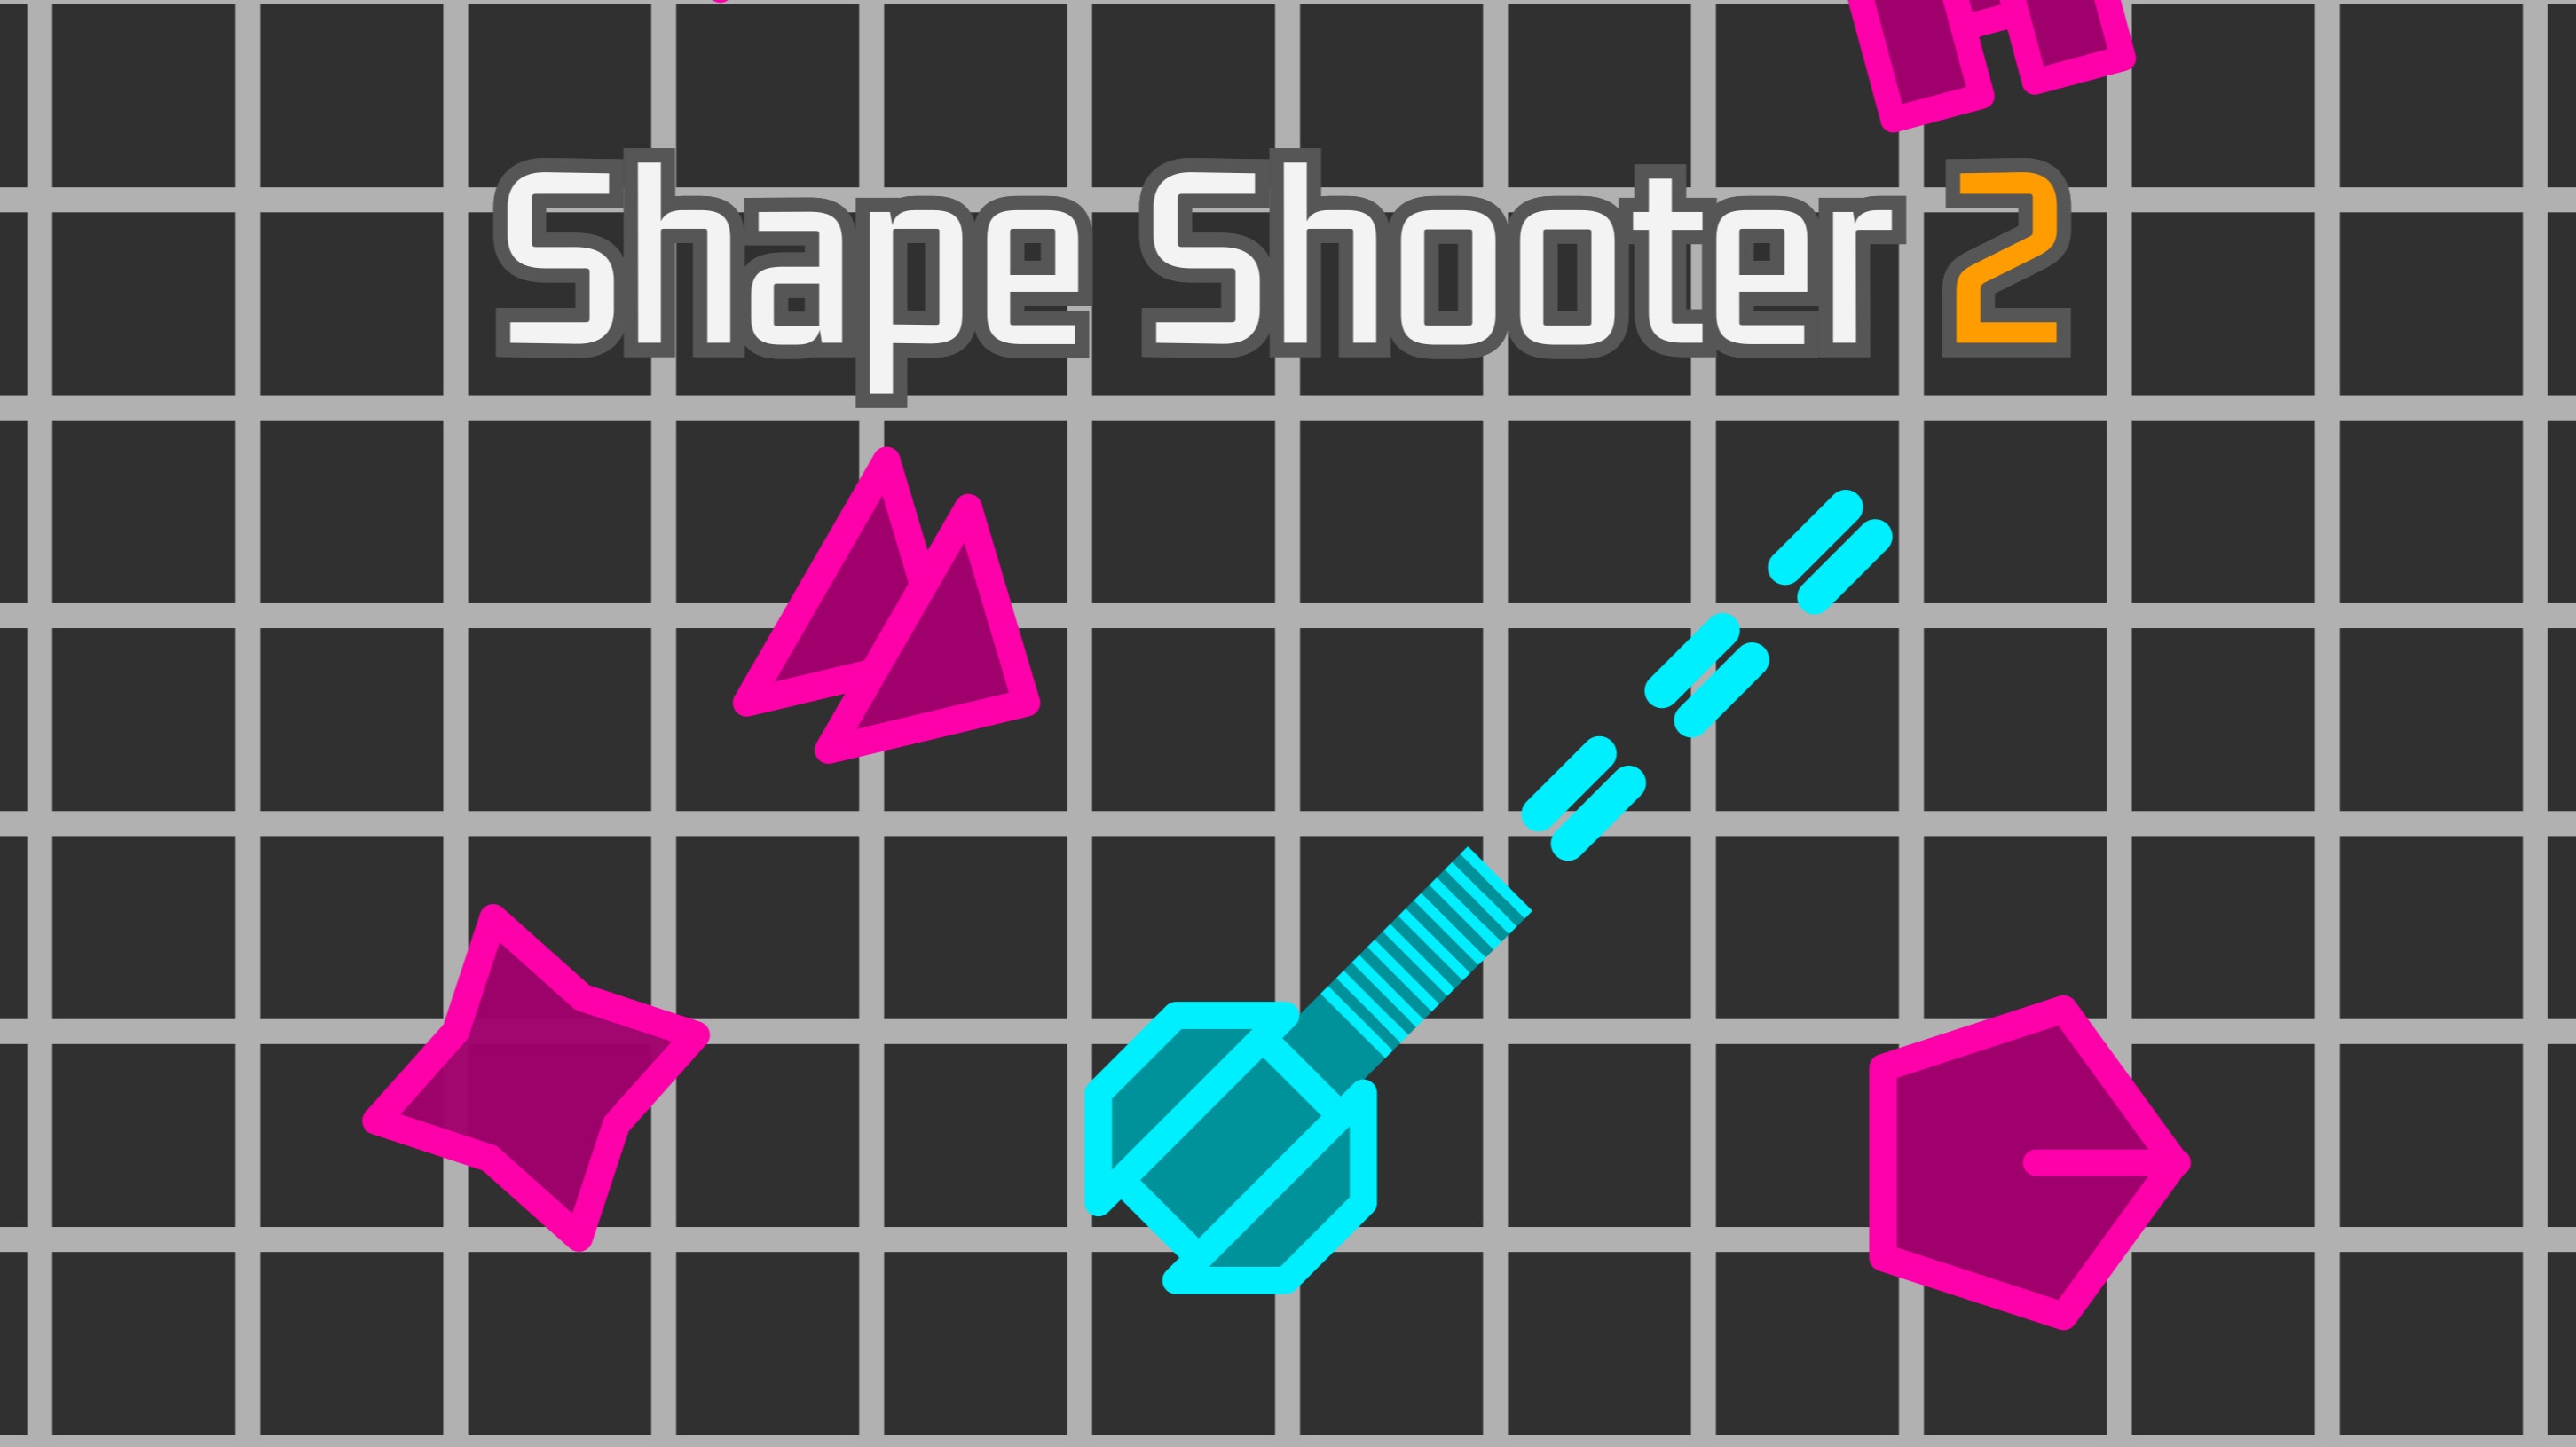 Crazy Shooters 2